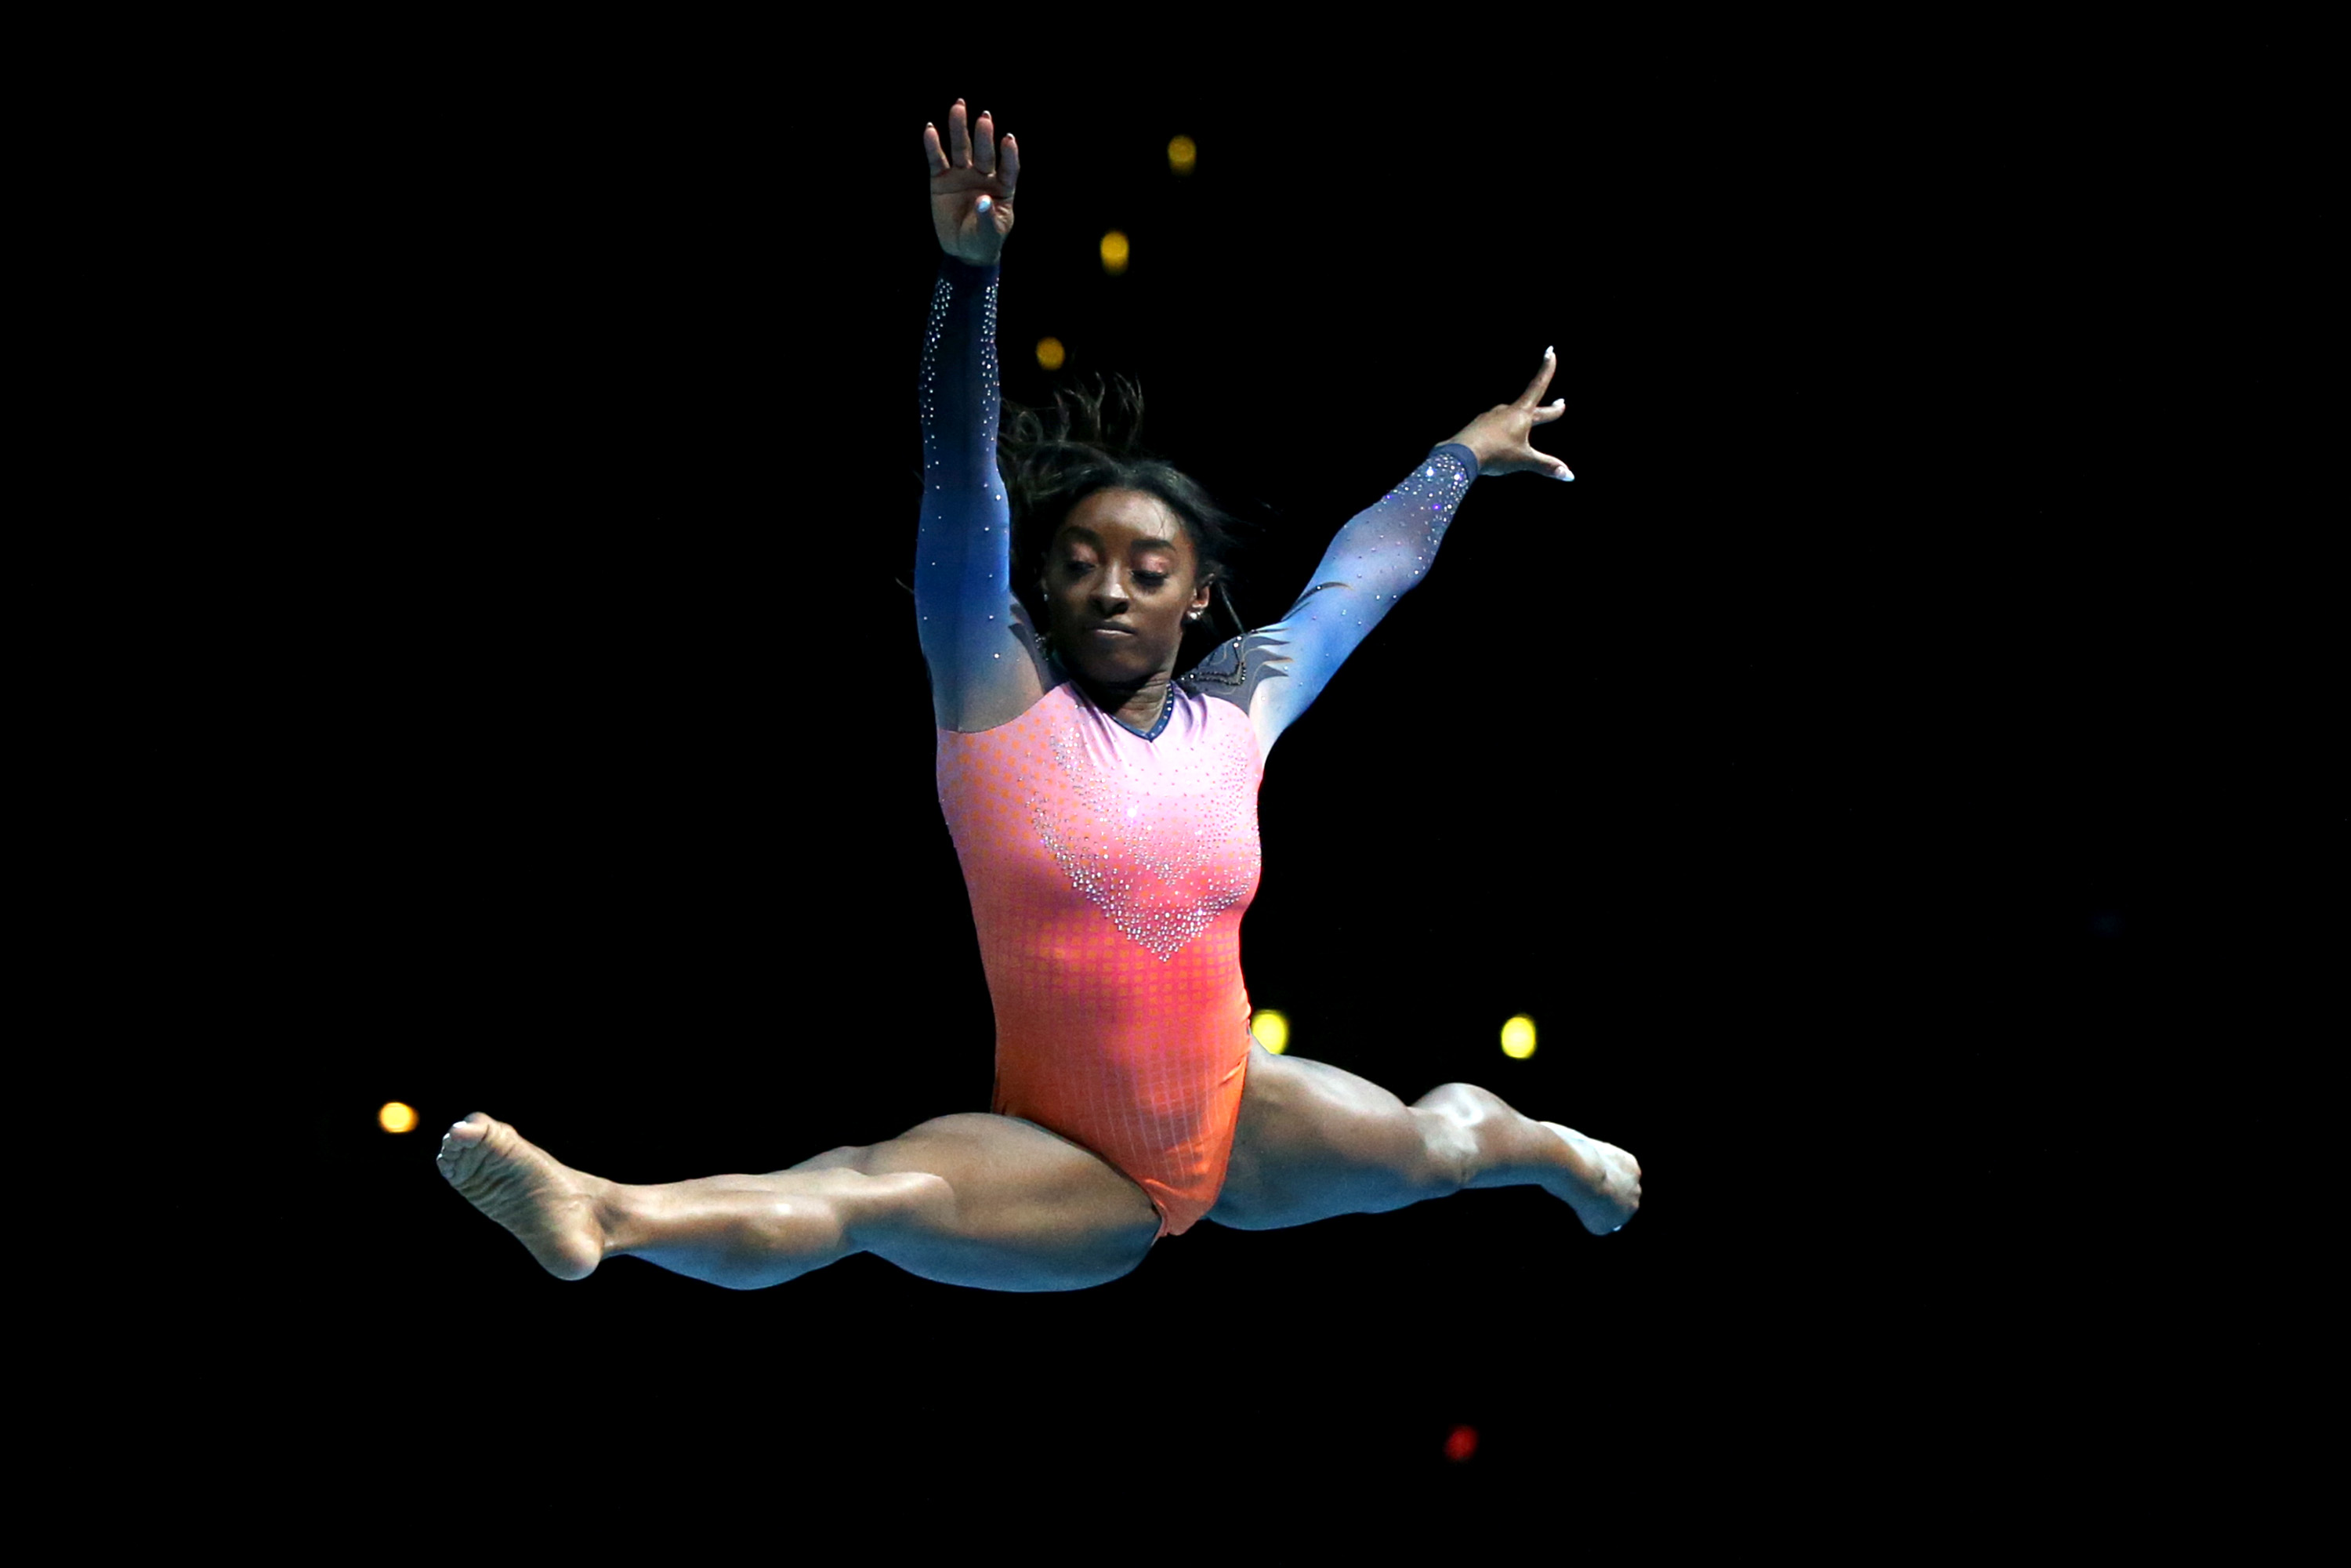 Simone Biles on September 25, 2021 in Los Angeles, California. | Source: Getty Images